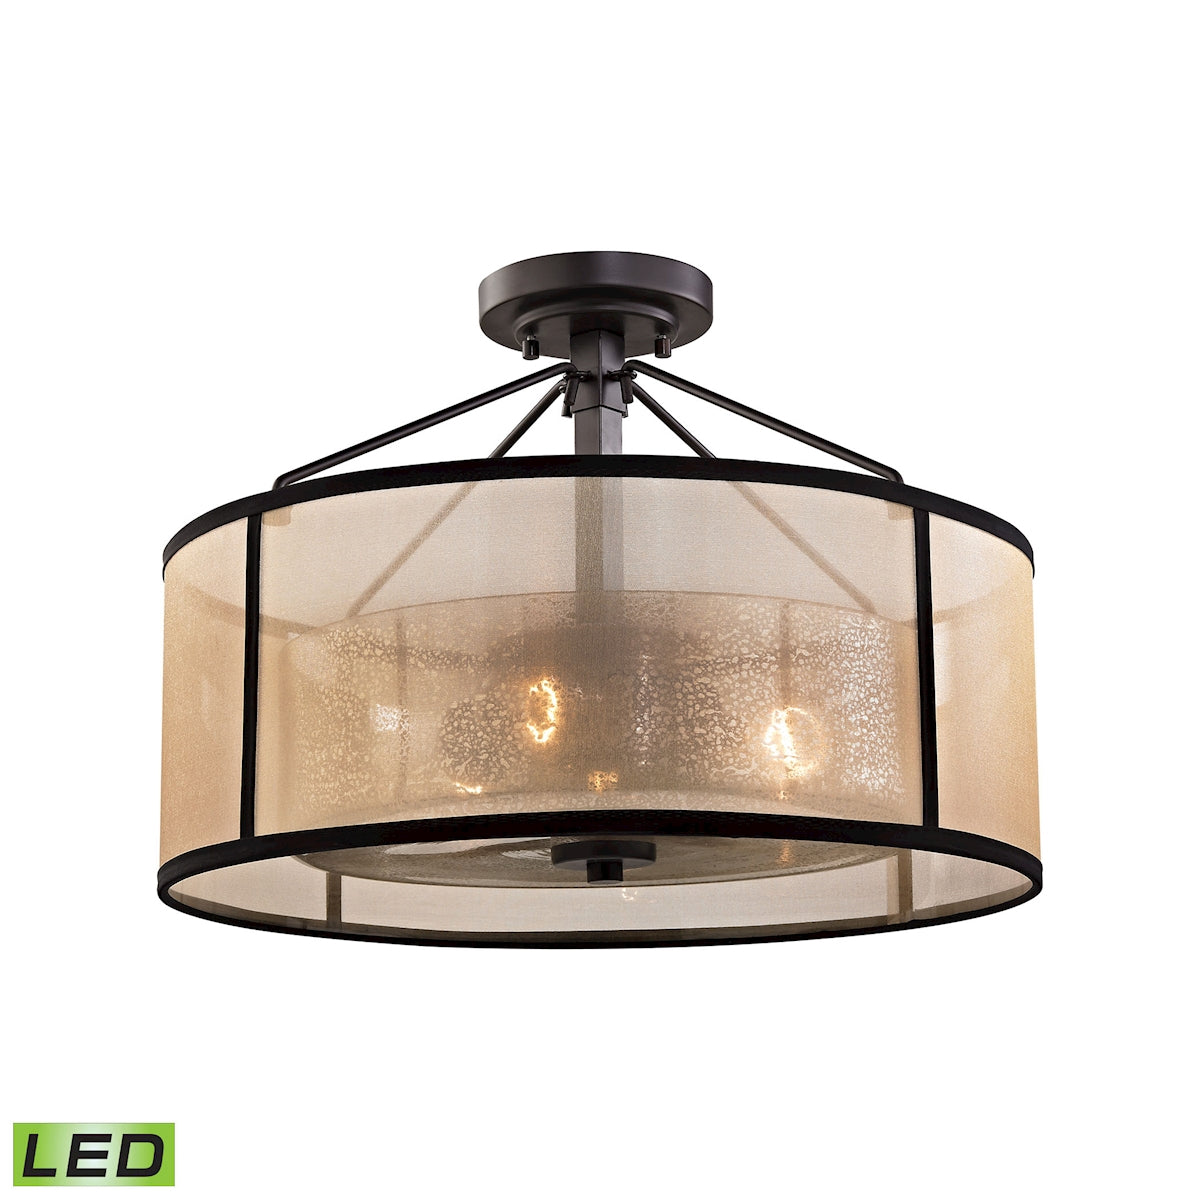 ELK Lighting 57024/3-LED Diffusion 3-Light Semi Flush in Oiled Bronze with Organza and Mercury Glass - Includes LED Bulbs